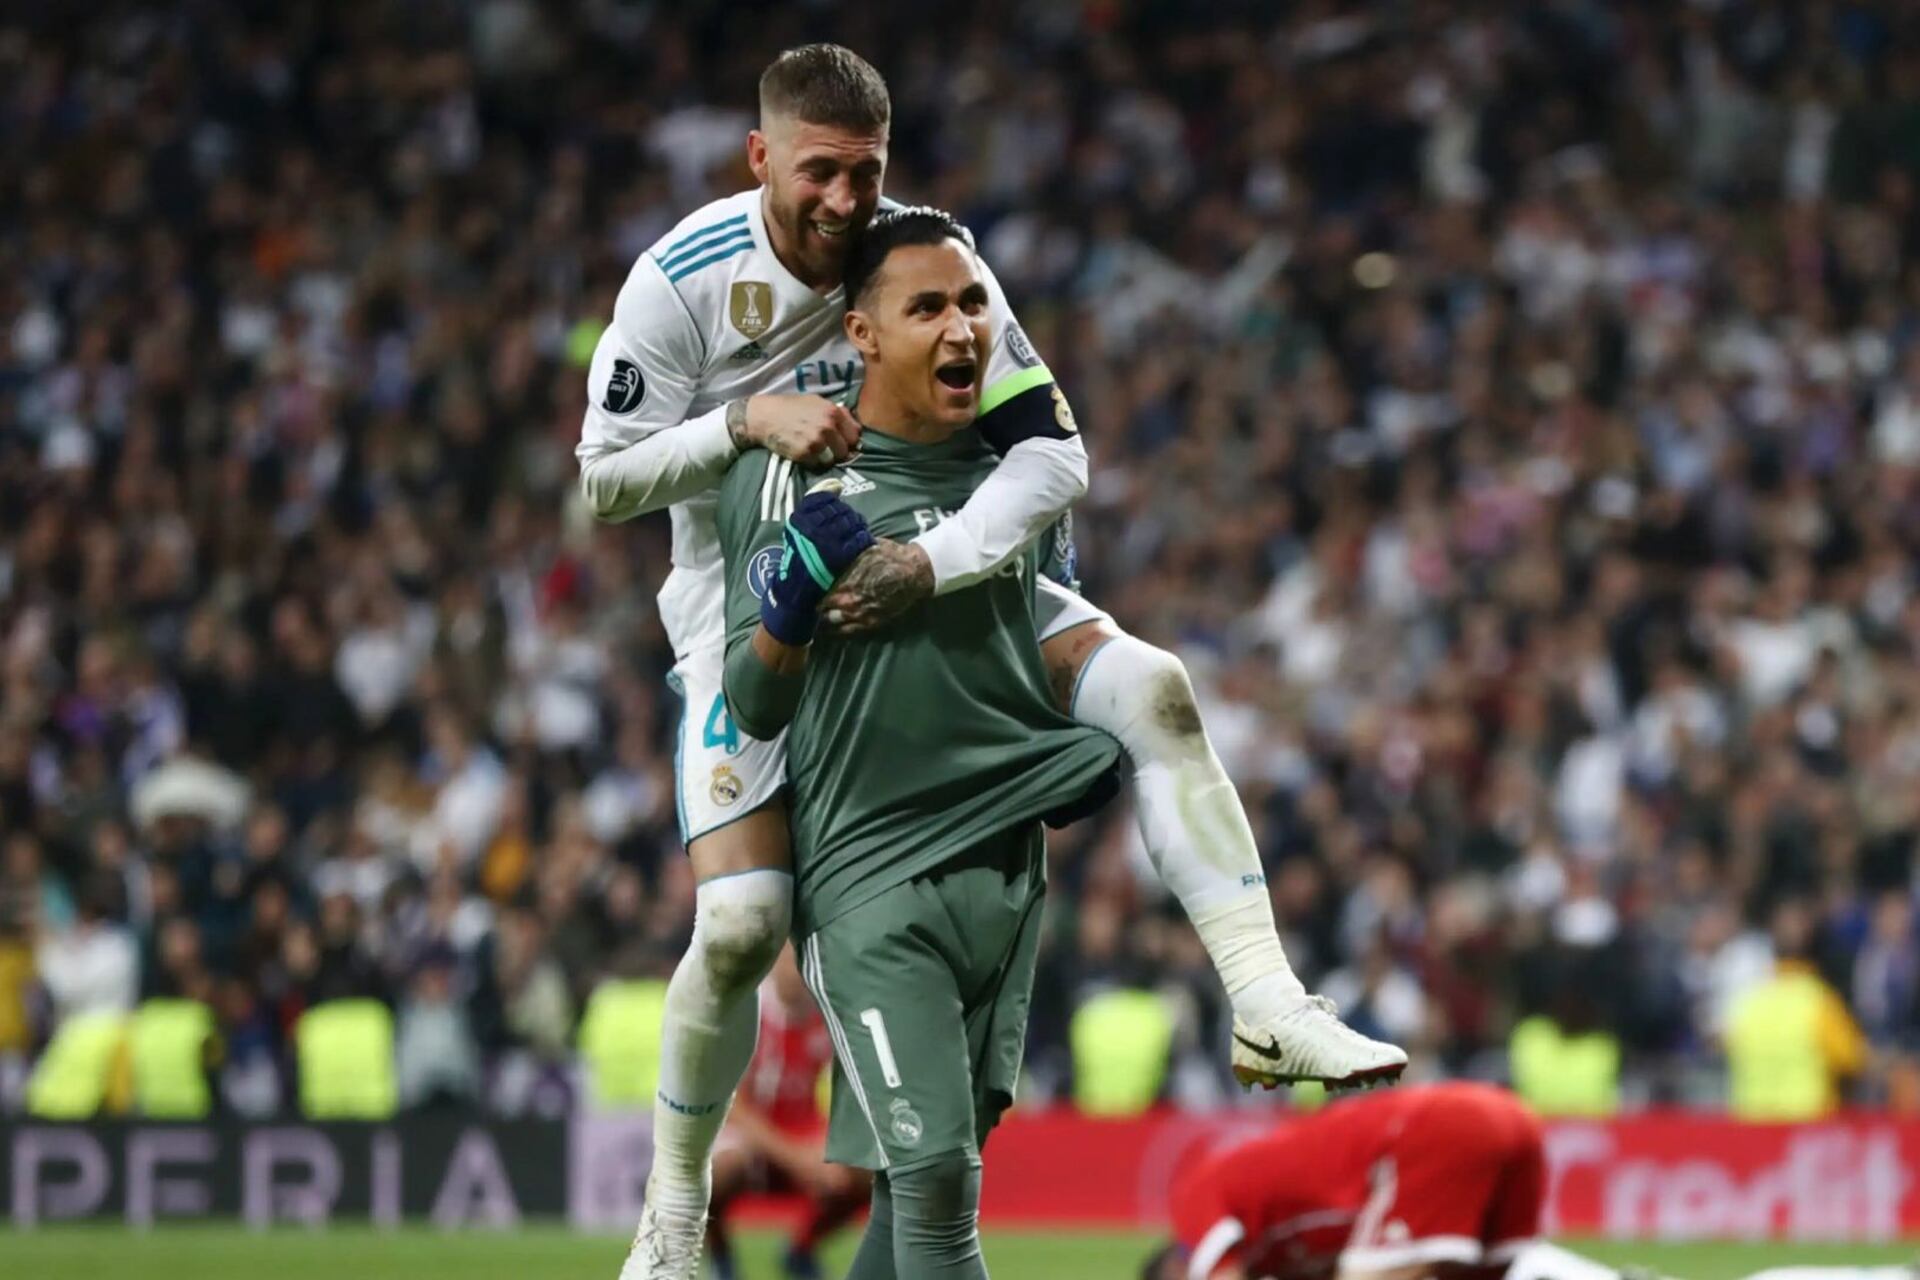 Keylor Navas offered himself to Real Madrid after Courtois' injury